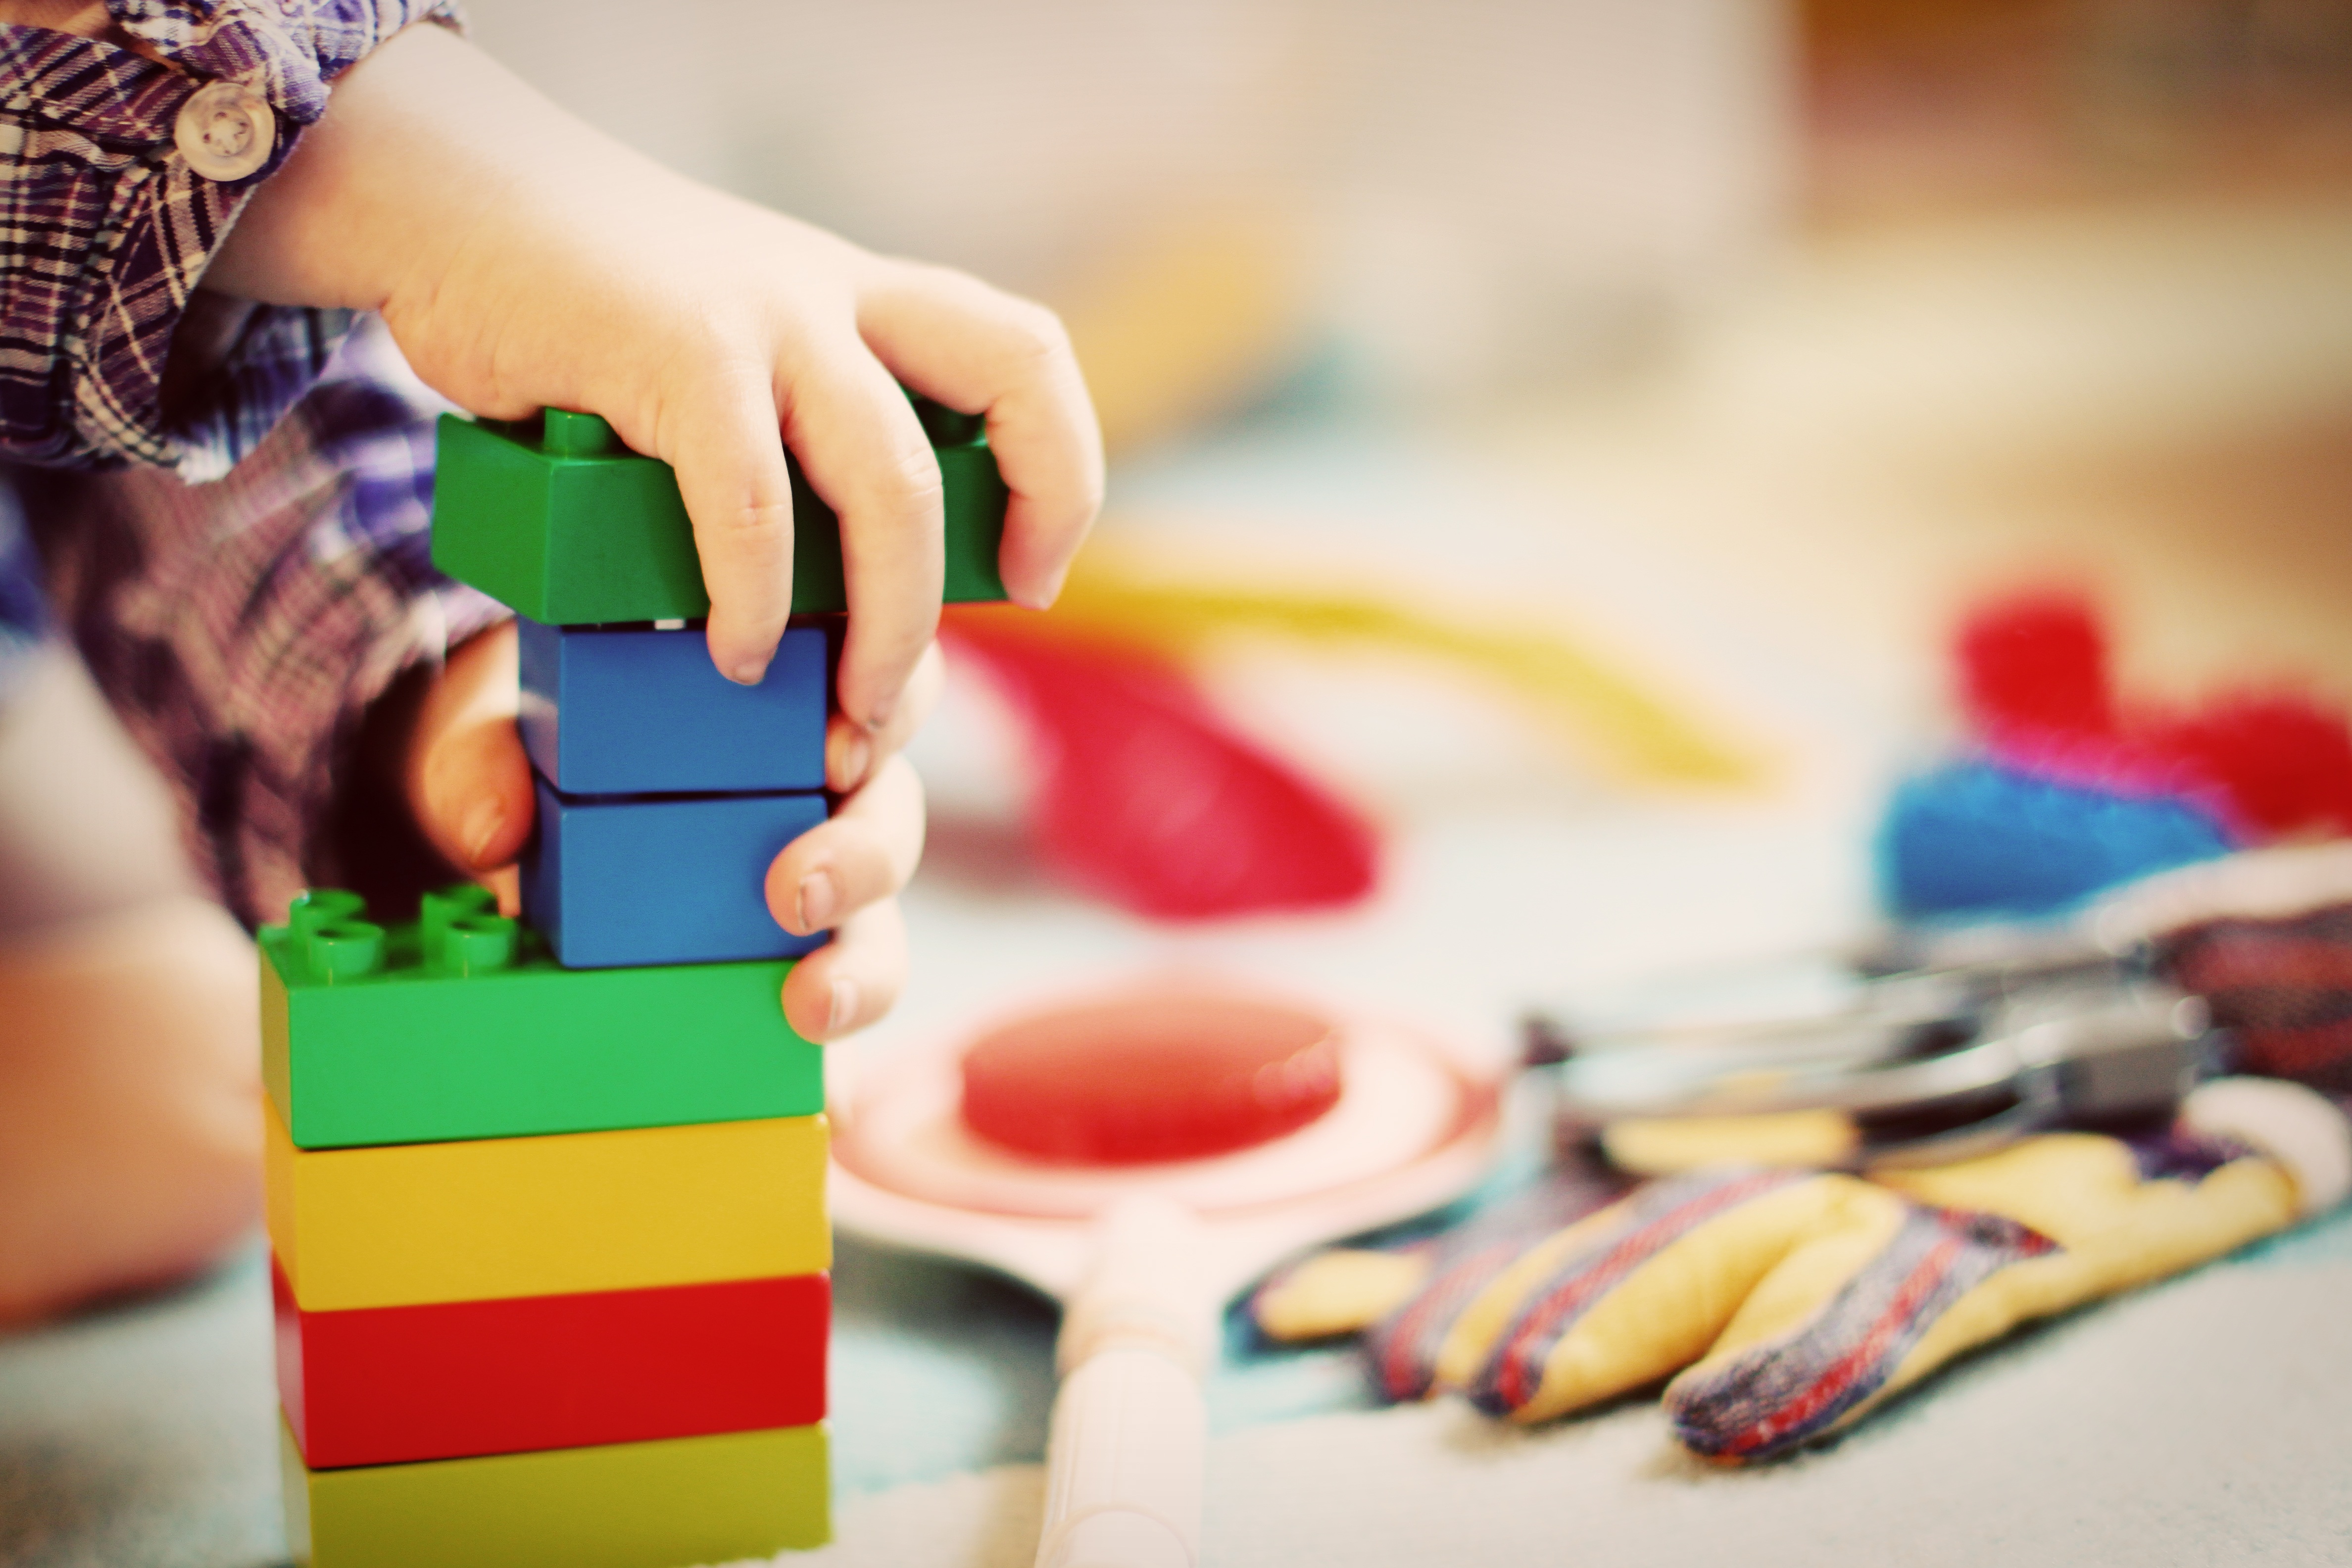 A toddler building a tower out of colorful blocks